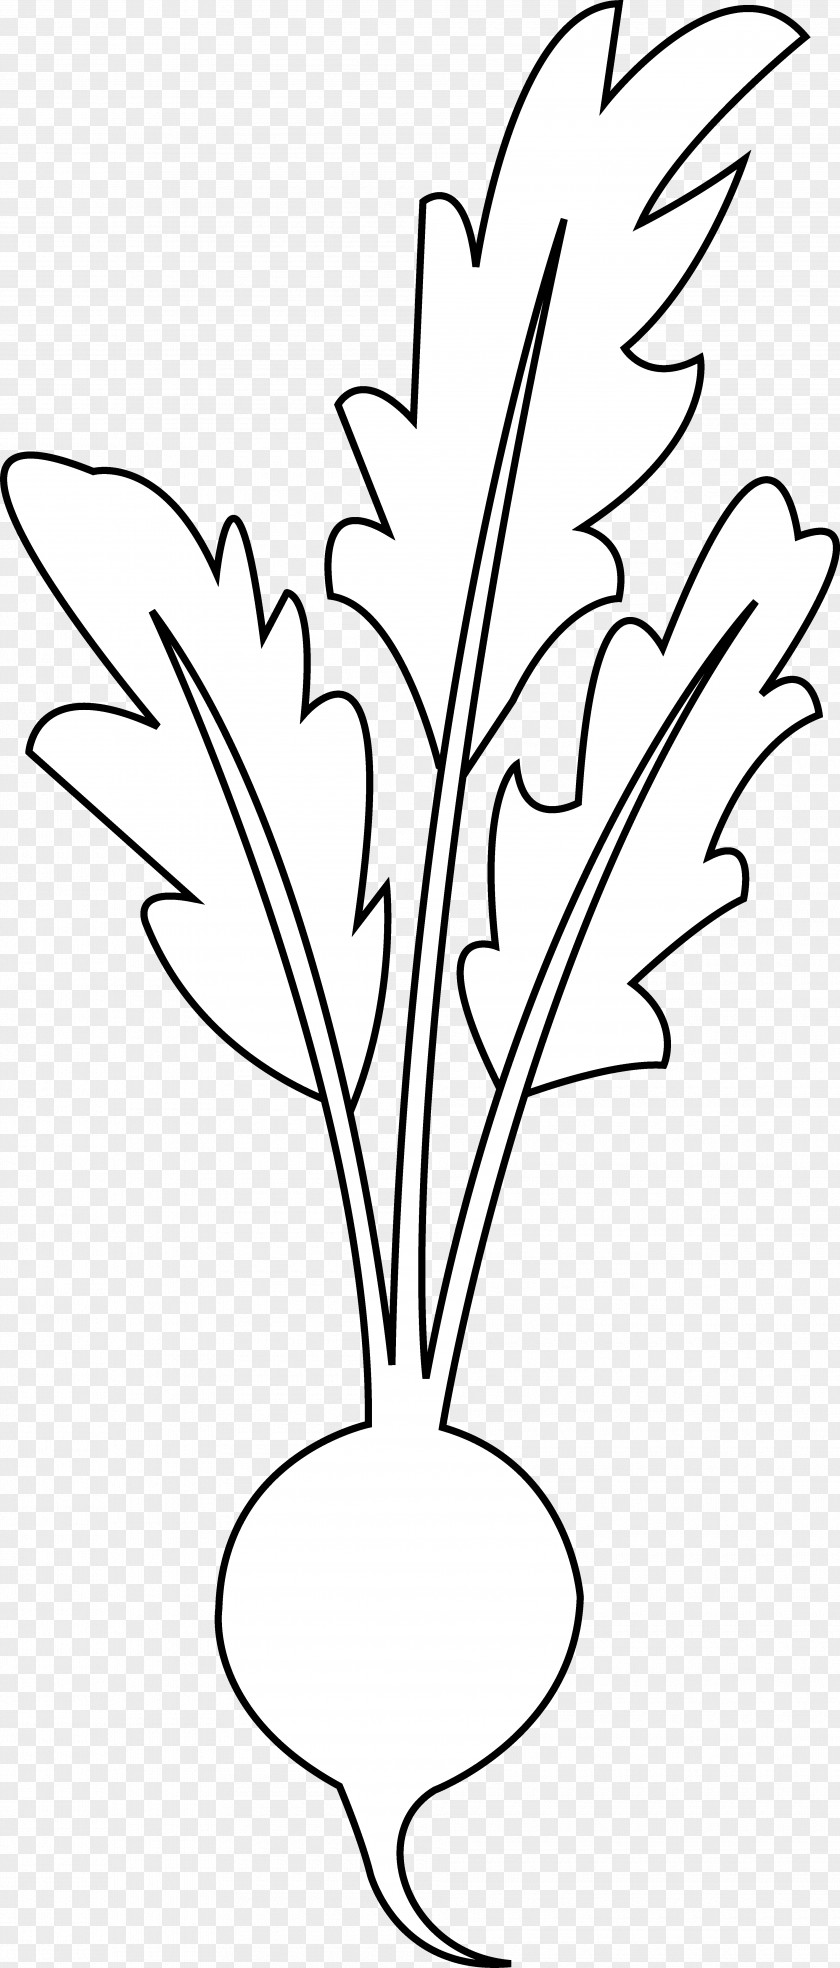 Beet Beetroot Line Art Vegetable Black And White Clip PNG